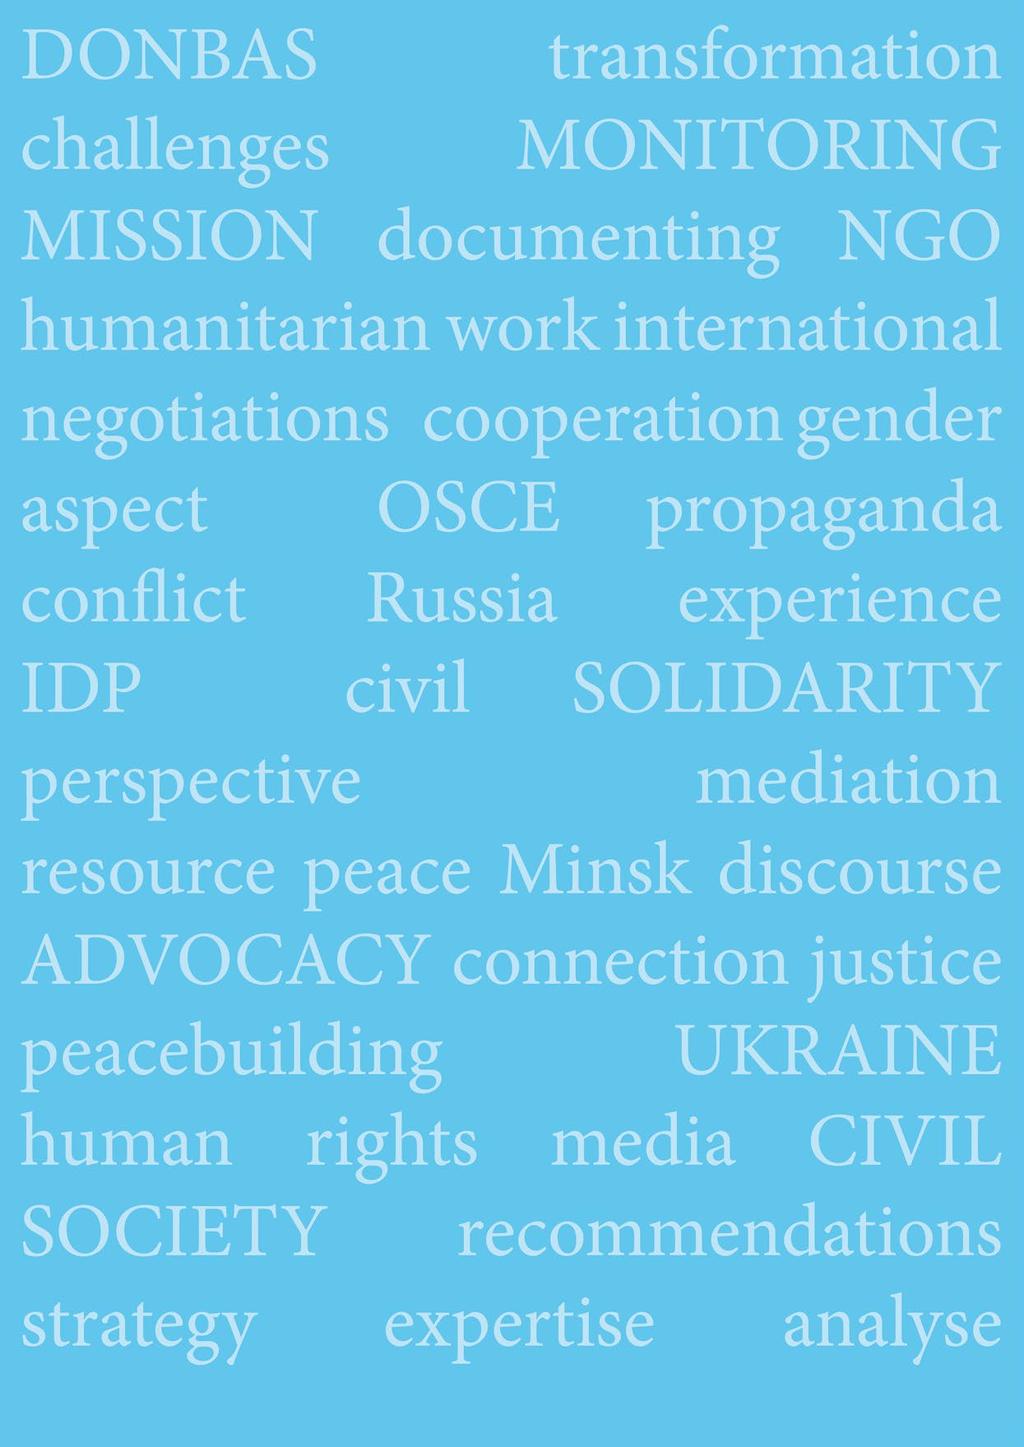 ENHANCING CIVIL SOCIETY S IMPACT IN DONBAS In the fourth year of the violent conflict in East Ukraine, this report refers to the work of civil society actors, as one of the driving forces for social